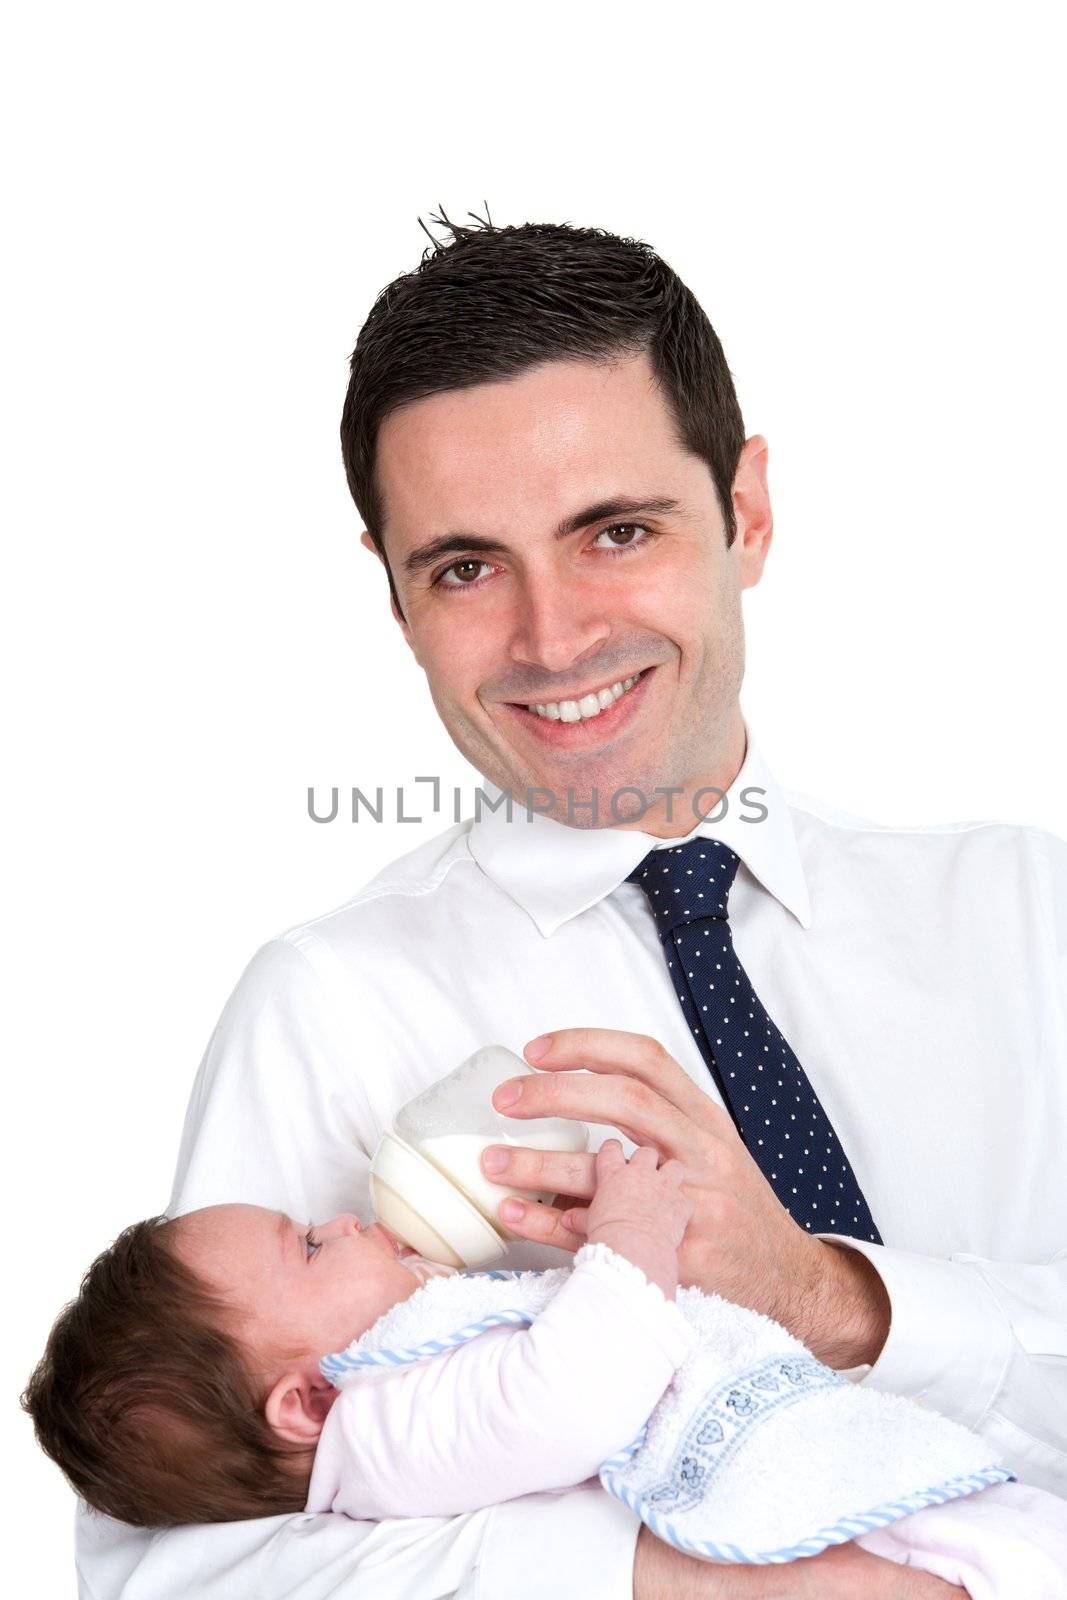 Handsome young business man feeding daughter with milk bottle. Isolated on white.